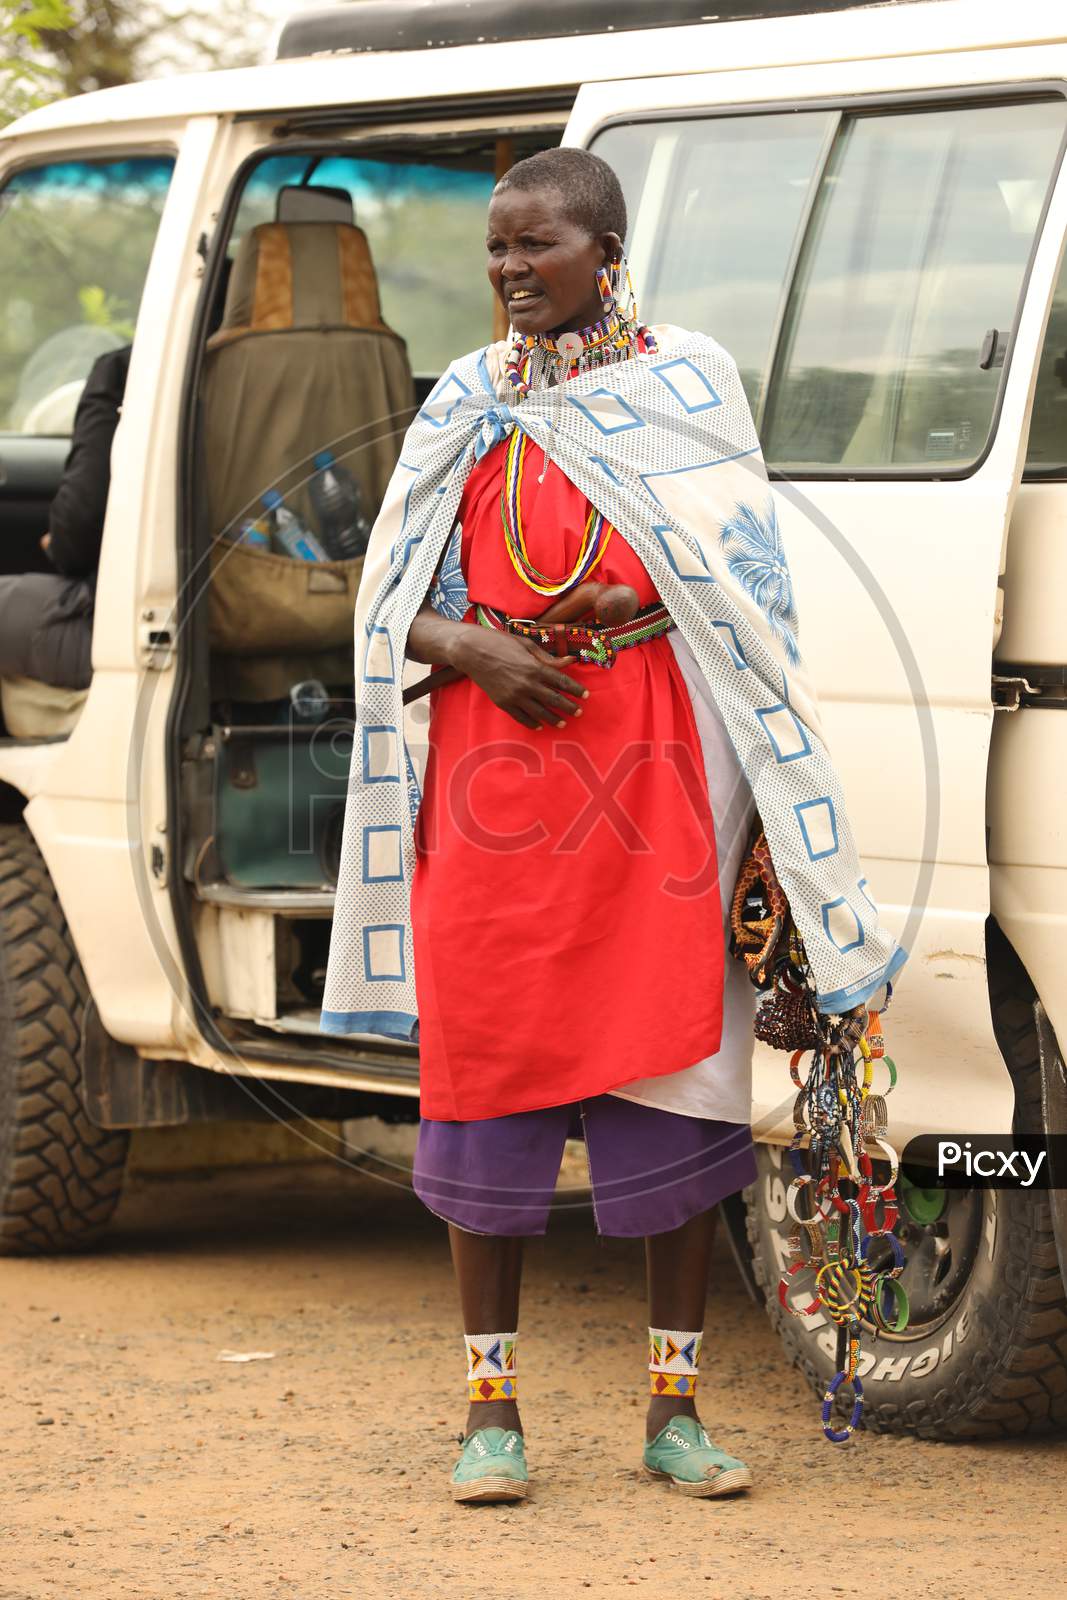 African Tribal woman standing by a car holding handmade accessories